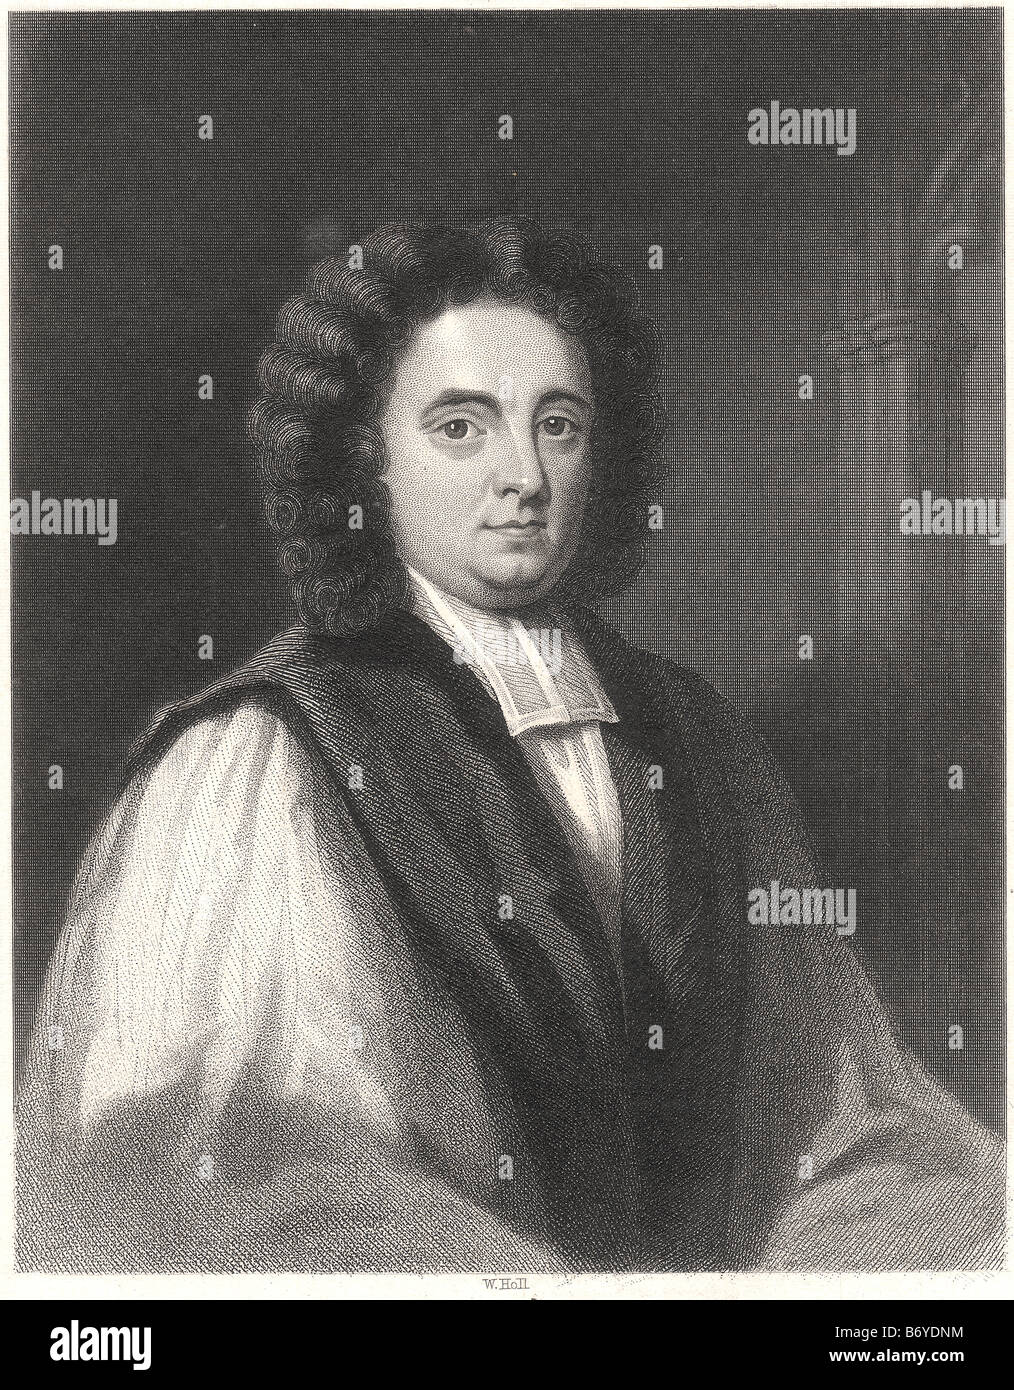 George Berkeley (12 March 1685 – 14 January 1753), also known as Bishop Berkeley, was an Irish philosopher. Stock Photo